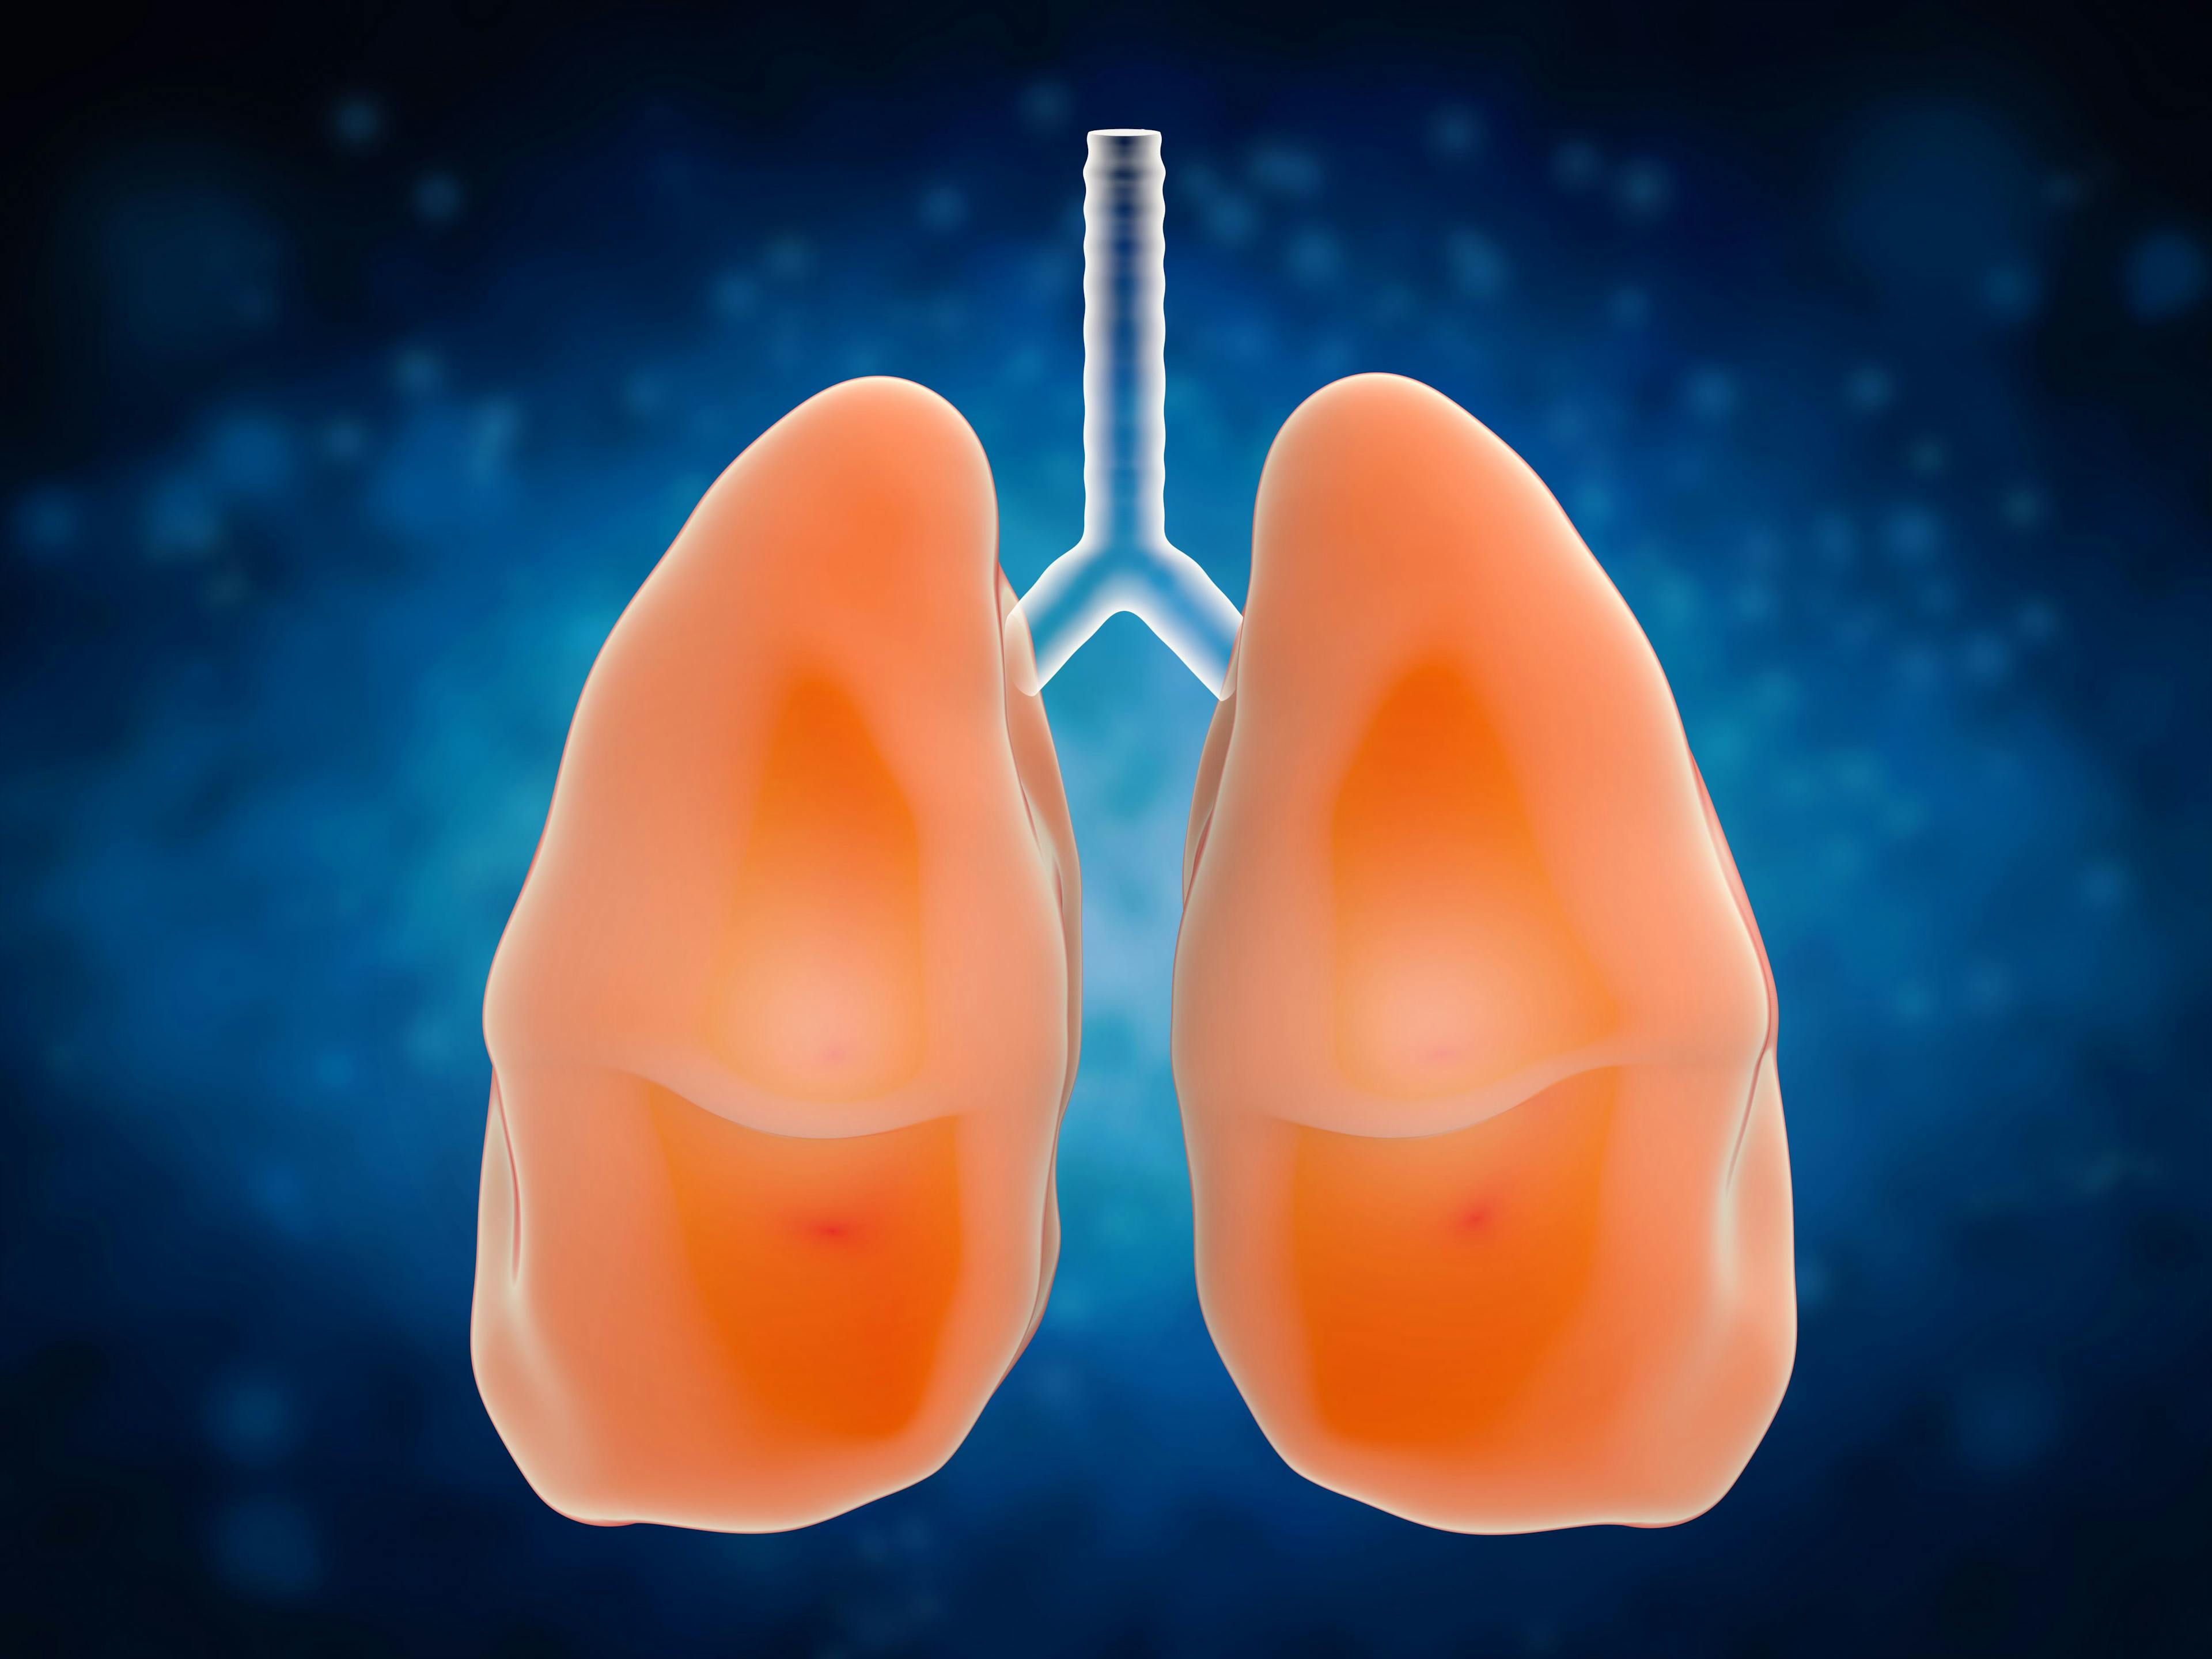 Imfinzi Plus Radiotherapy Is ‘Promising’ for Certain Patients With NSCLC